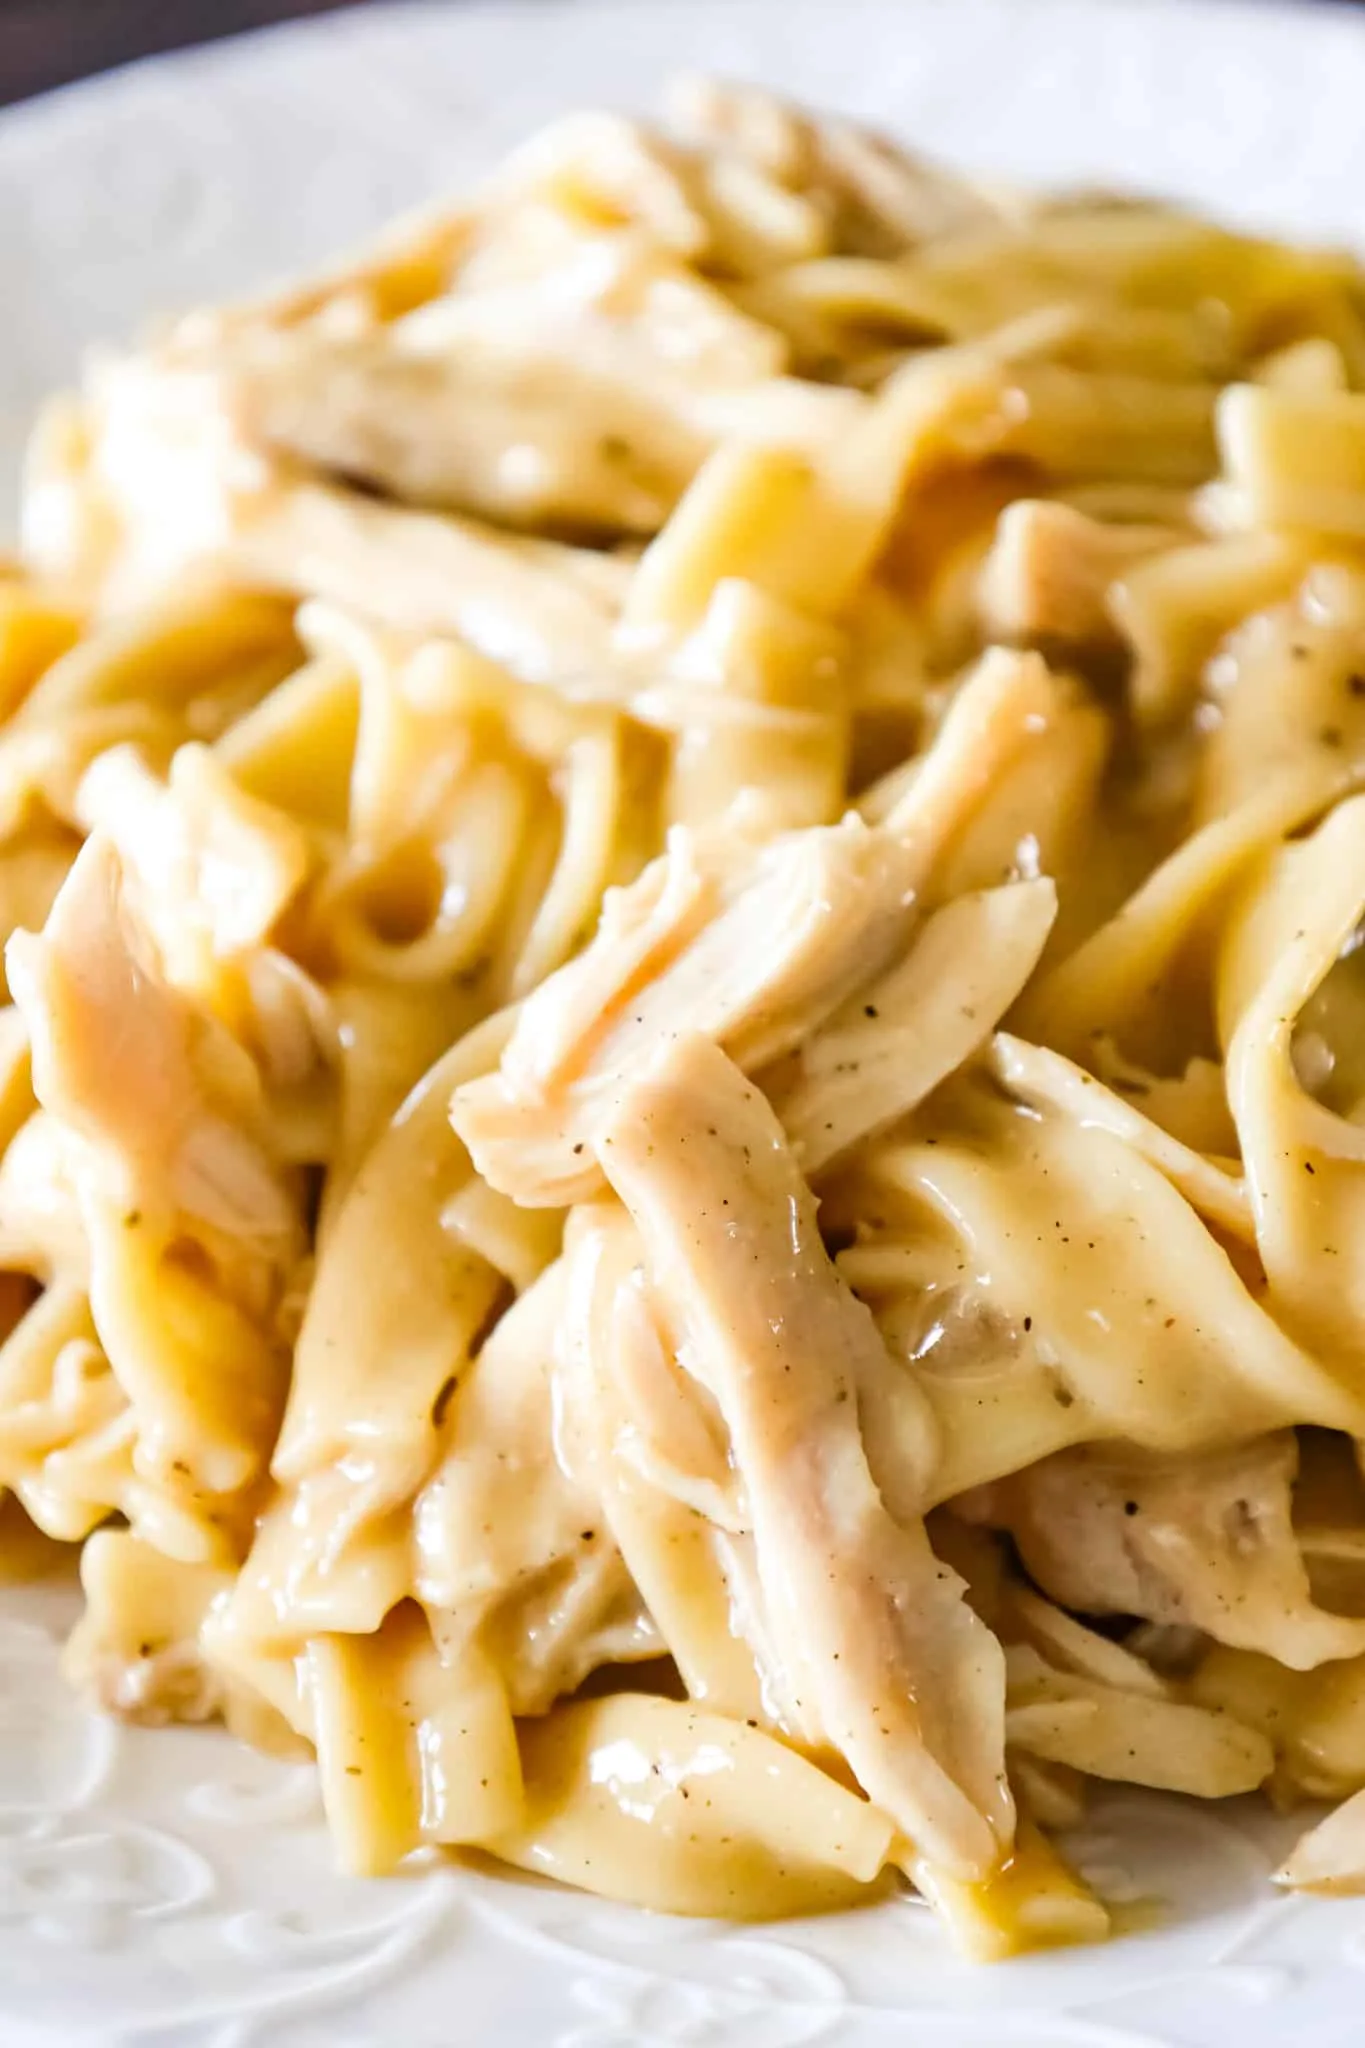 Instant Pot Chicken and Noodles is an easy pressure cooker dinner recipe using boneless, skinless chicken breasts and egg noodles in a sauce made with chicken broth, cream of chicken soup and chicken gravy mix.